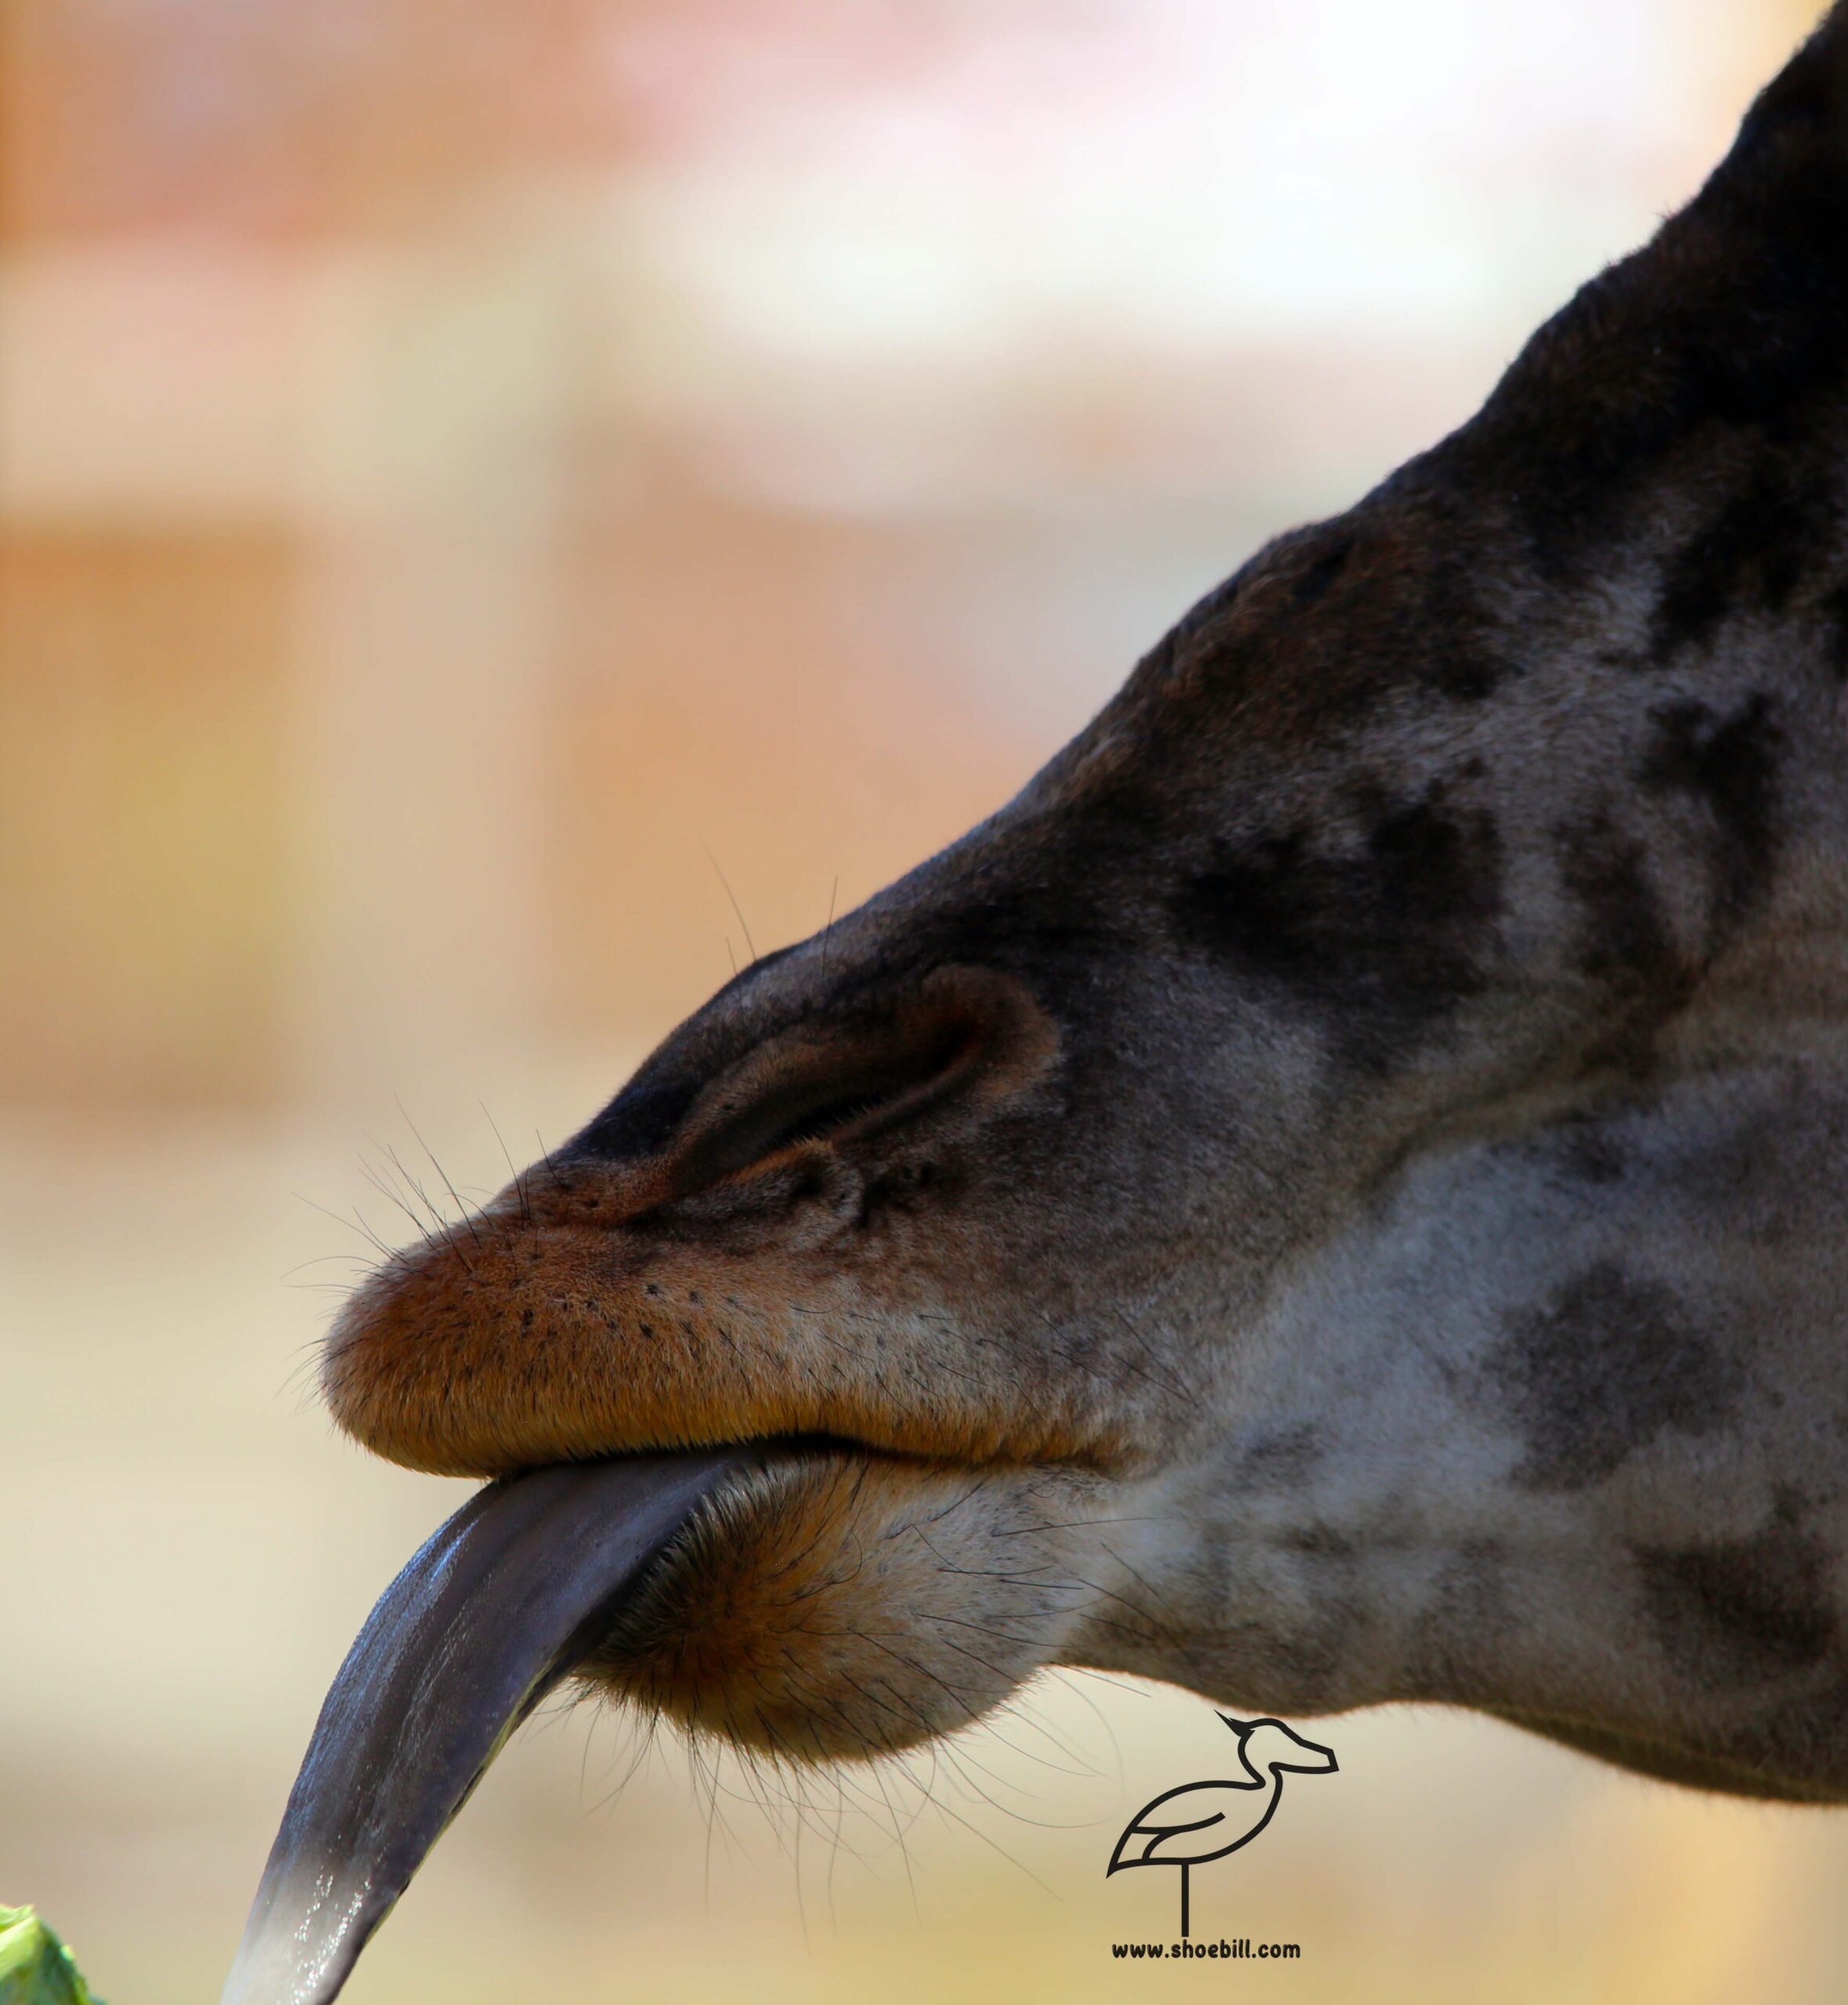 What color (colour) is a giraffe’s tongue?